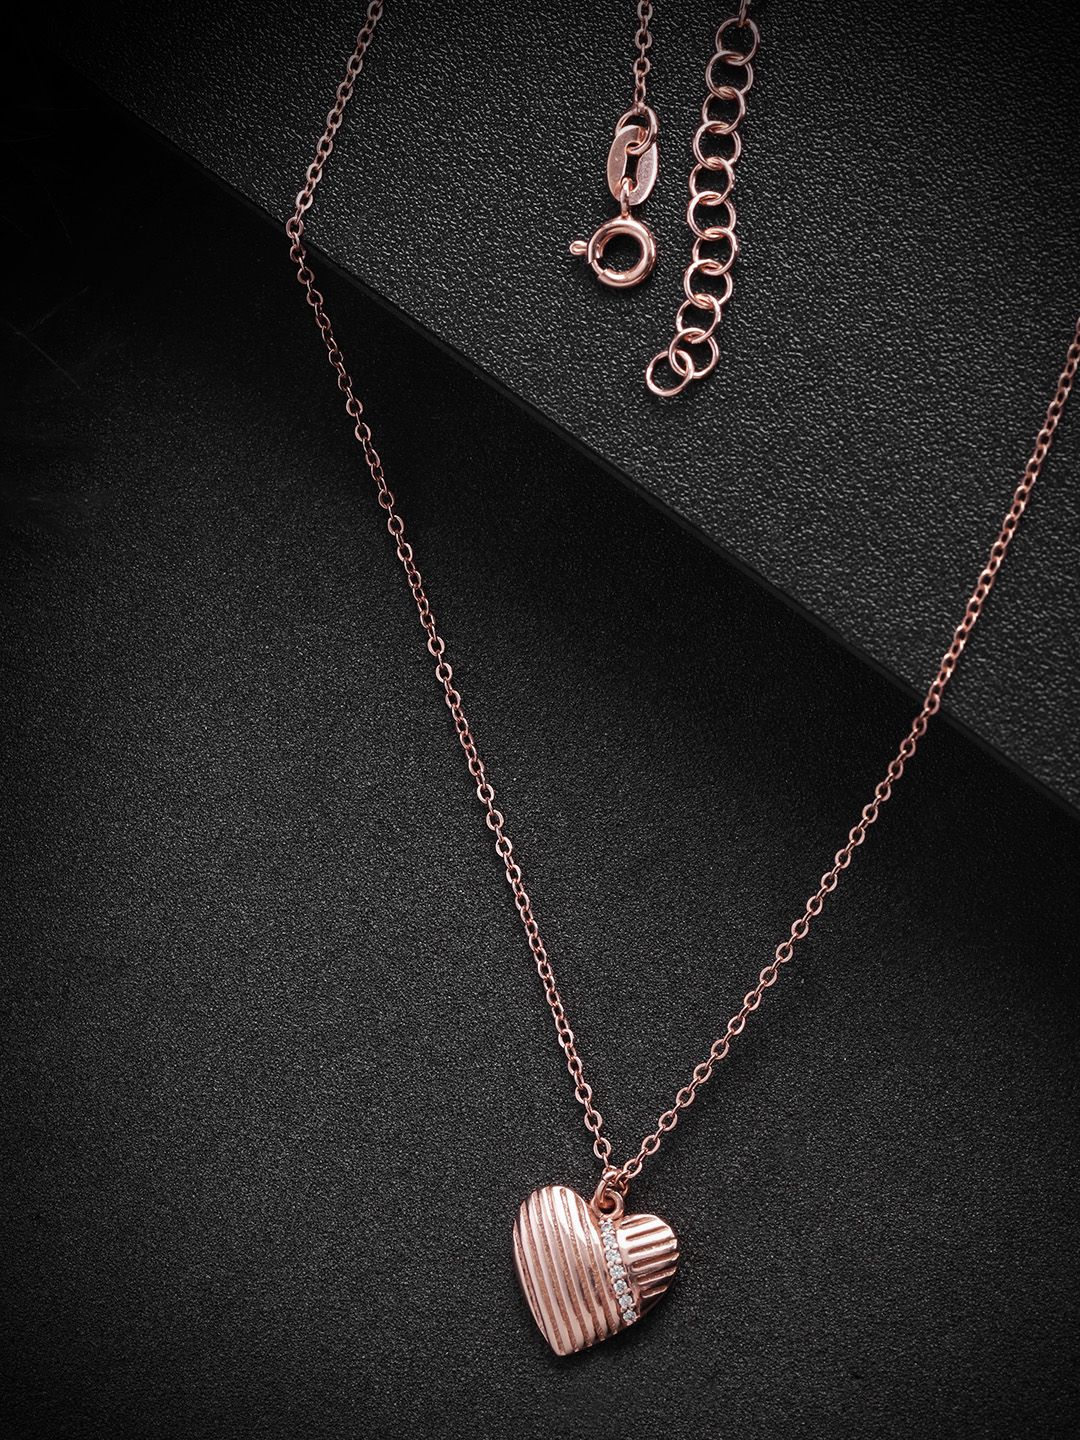 Carlton London Rose Gold-Plated CZ-Studded Heart-Shaped Necklace Price in India